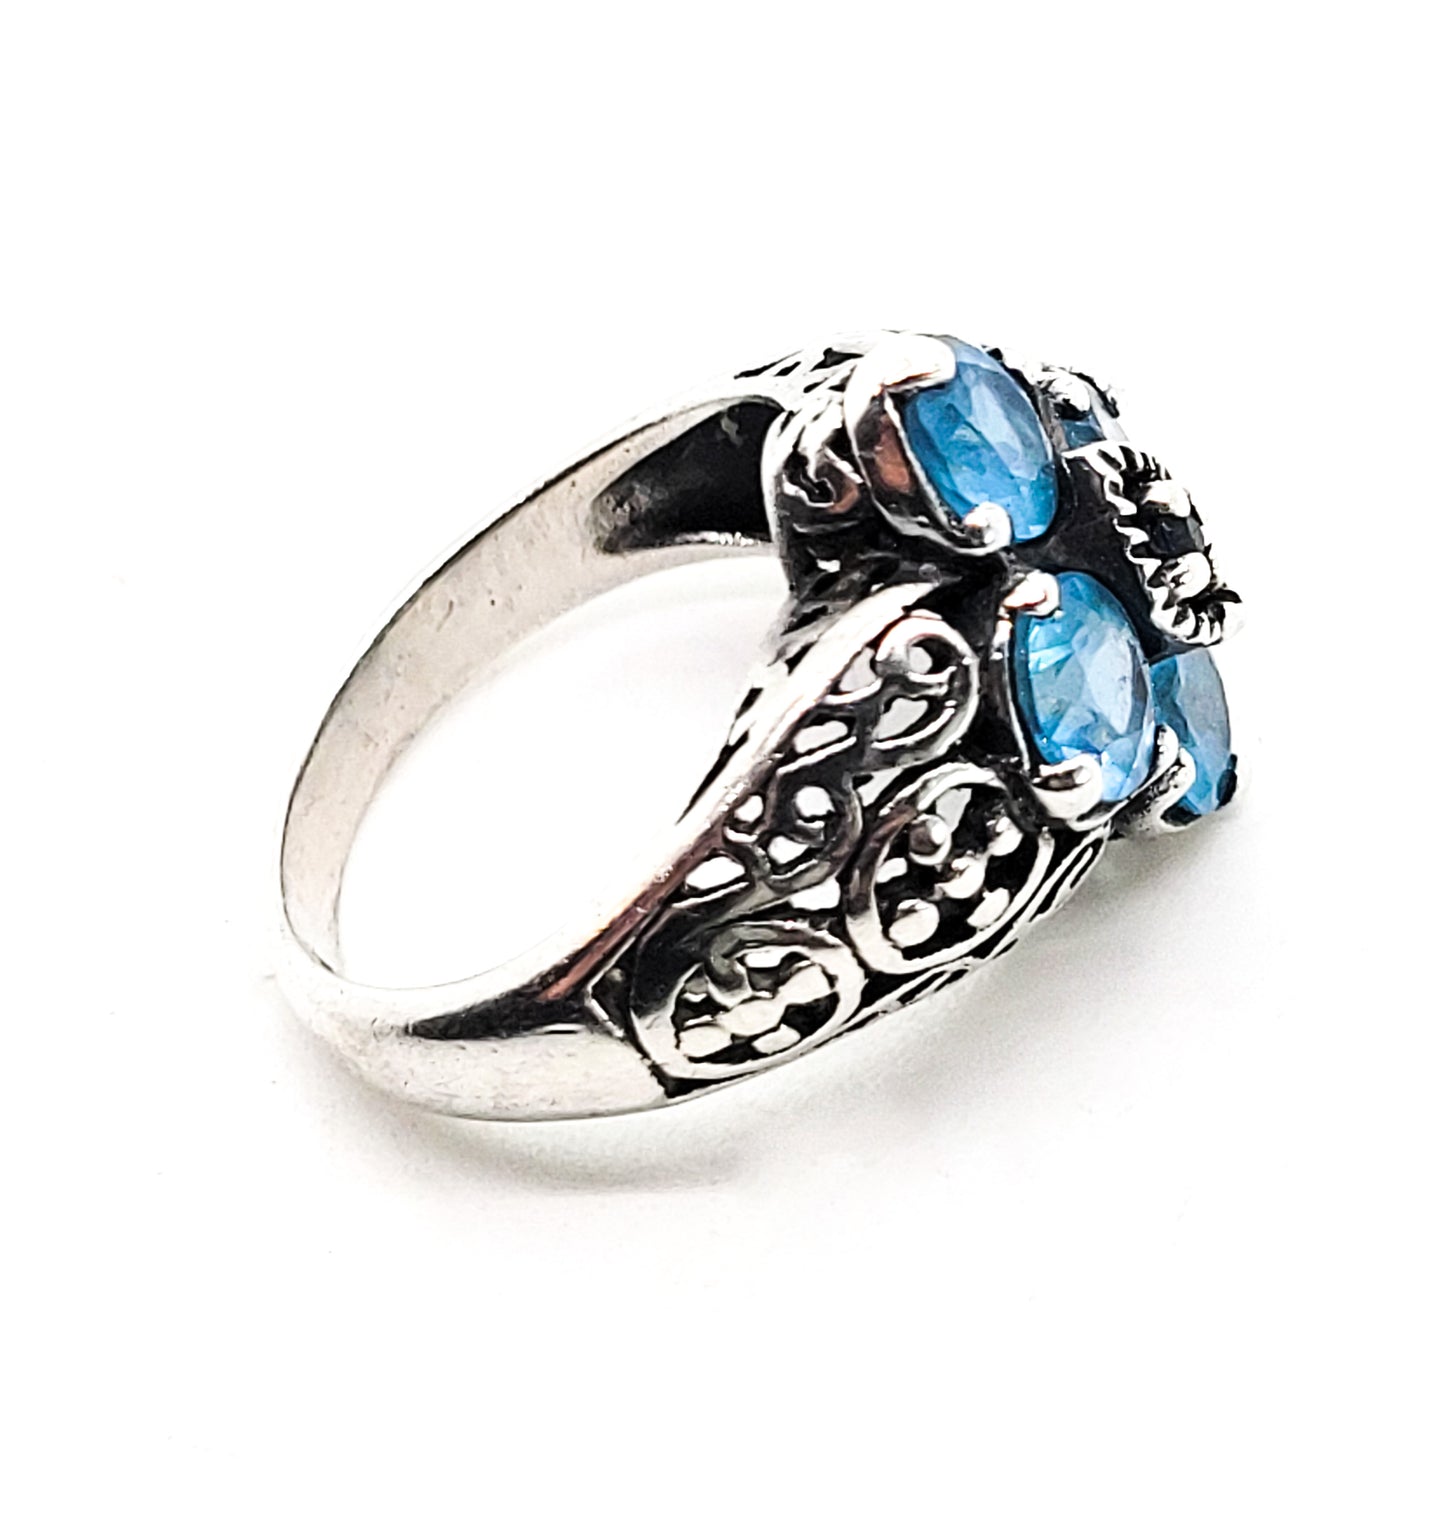 Blue Topaz Sapphire Balinese tribal filigree sterling silver ring size 6